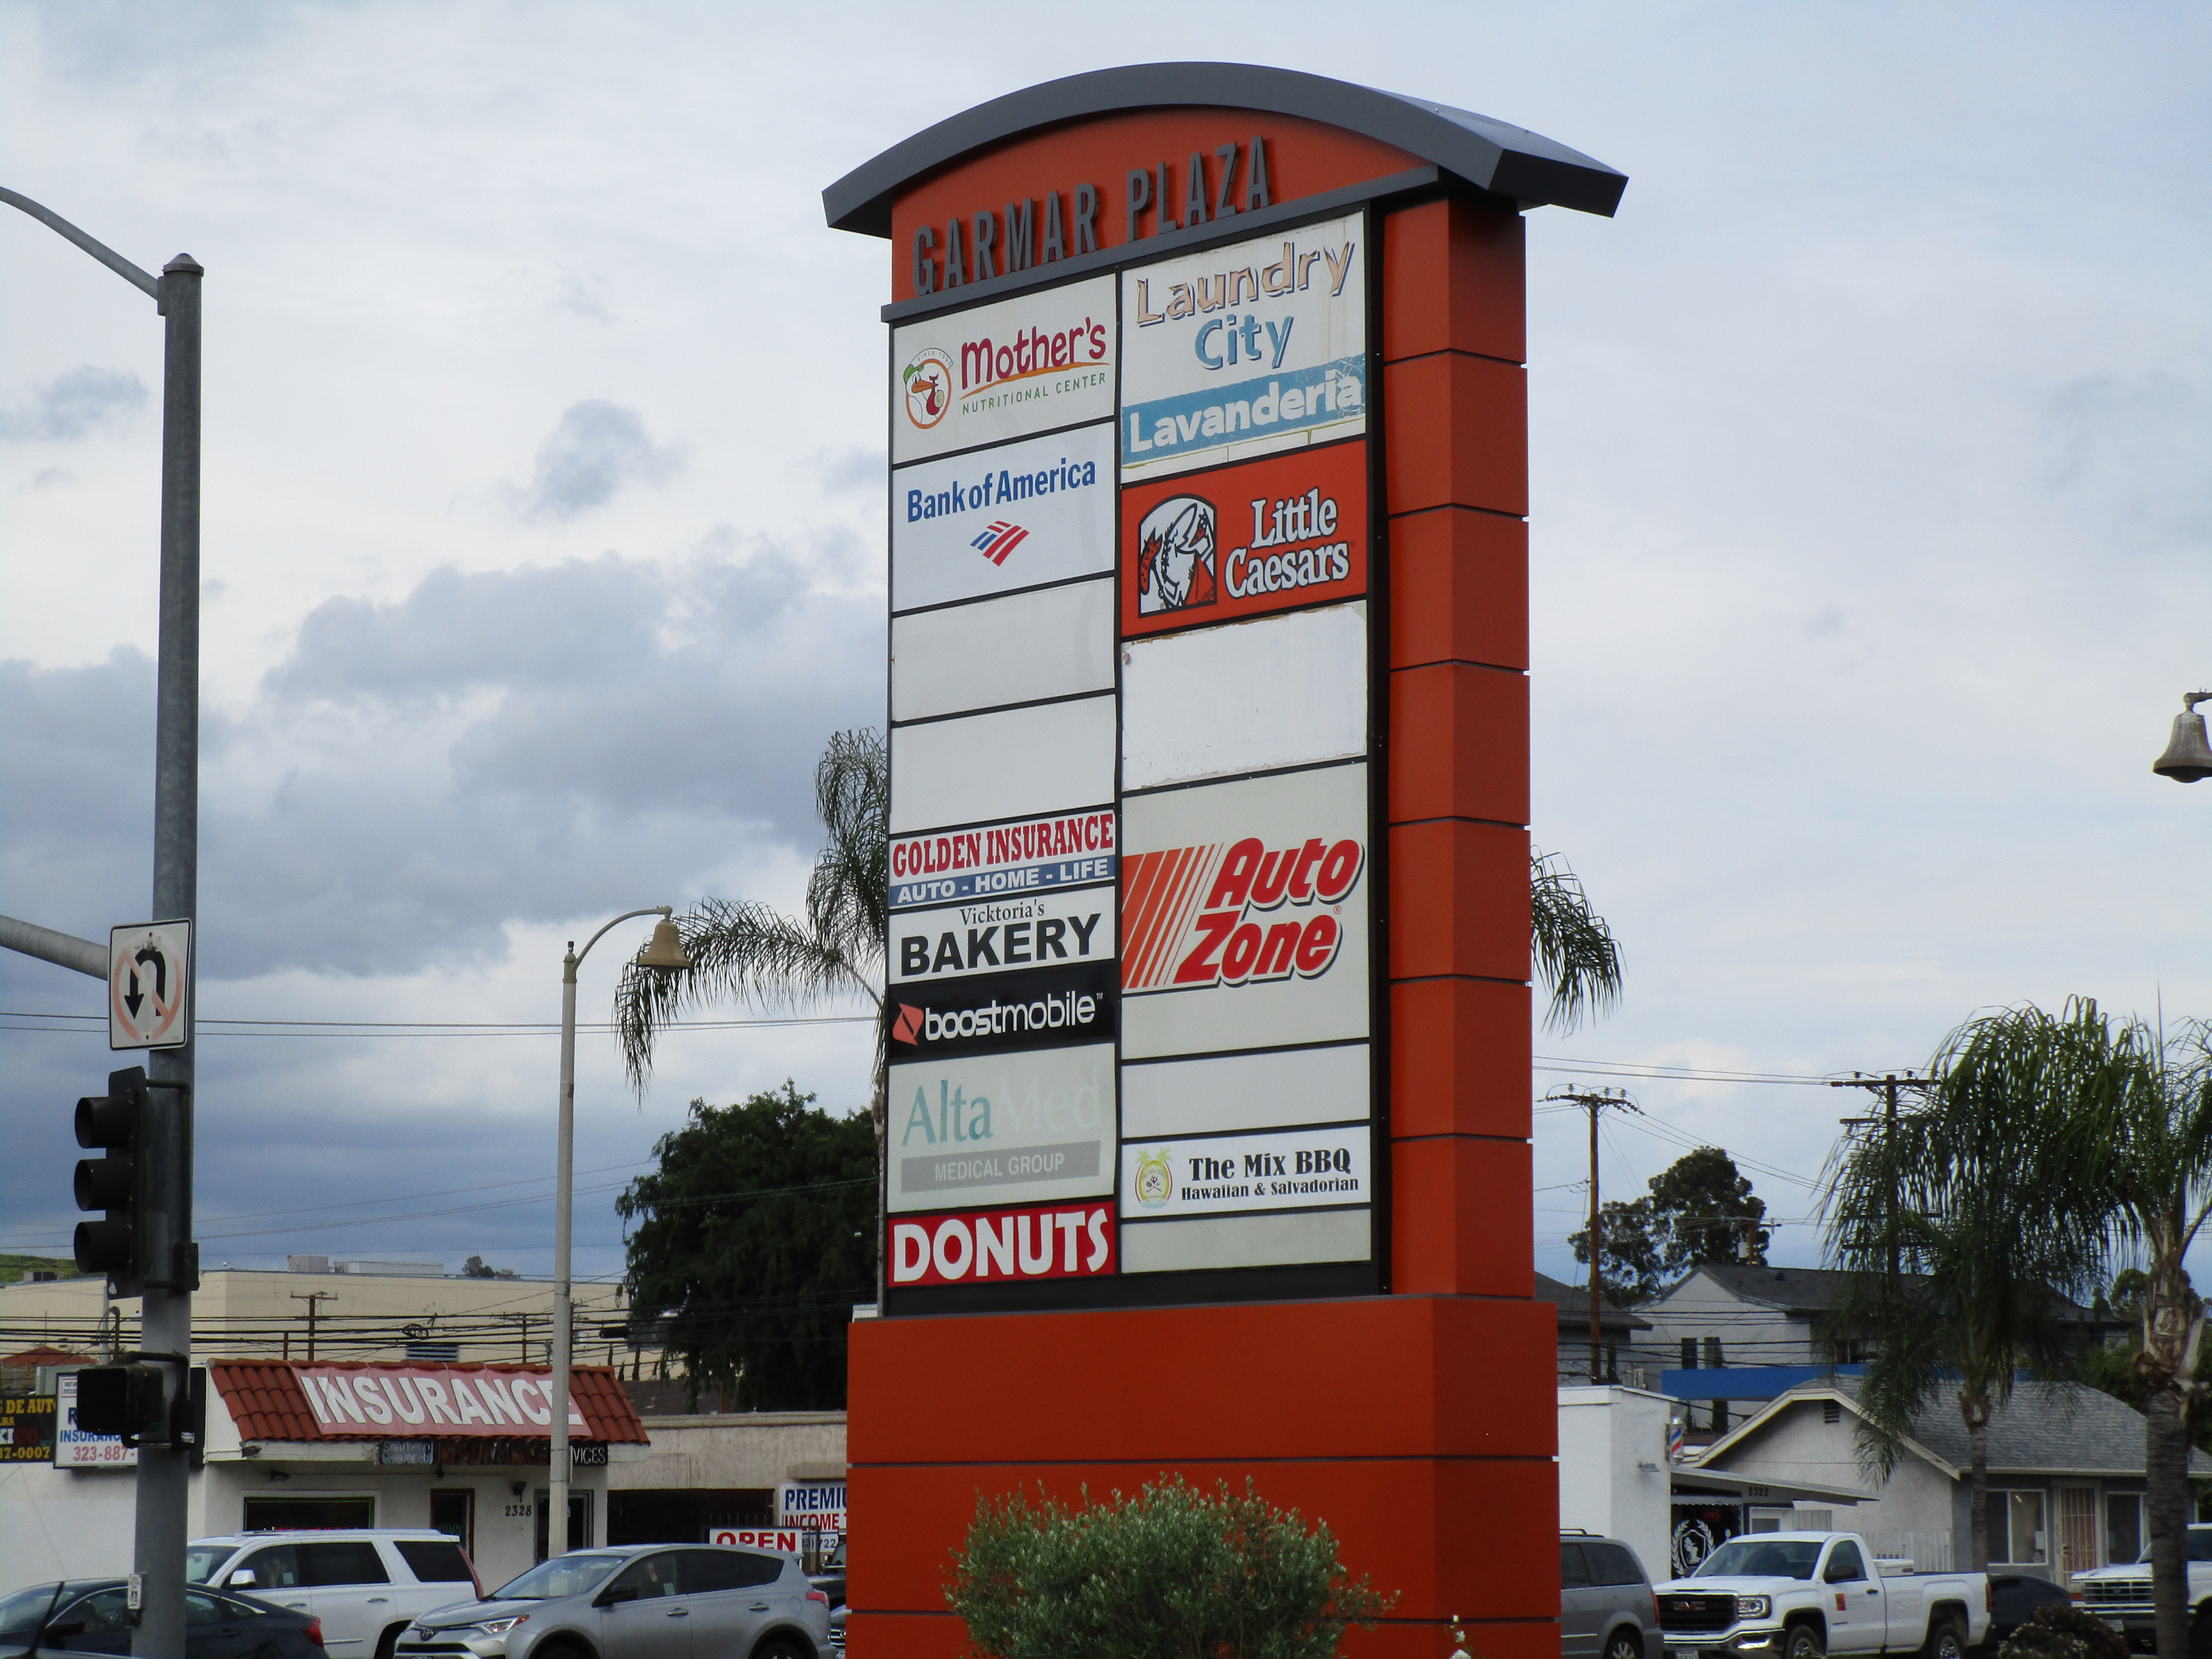 Garmar Plaza in Montebello, CA came to us wanting to refresh their existing shopping mall sign.